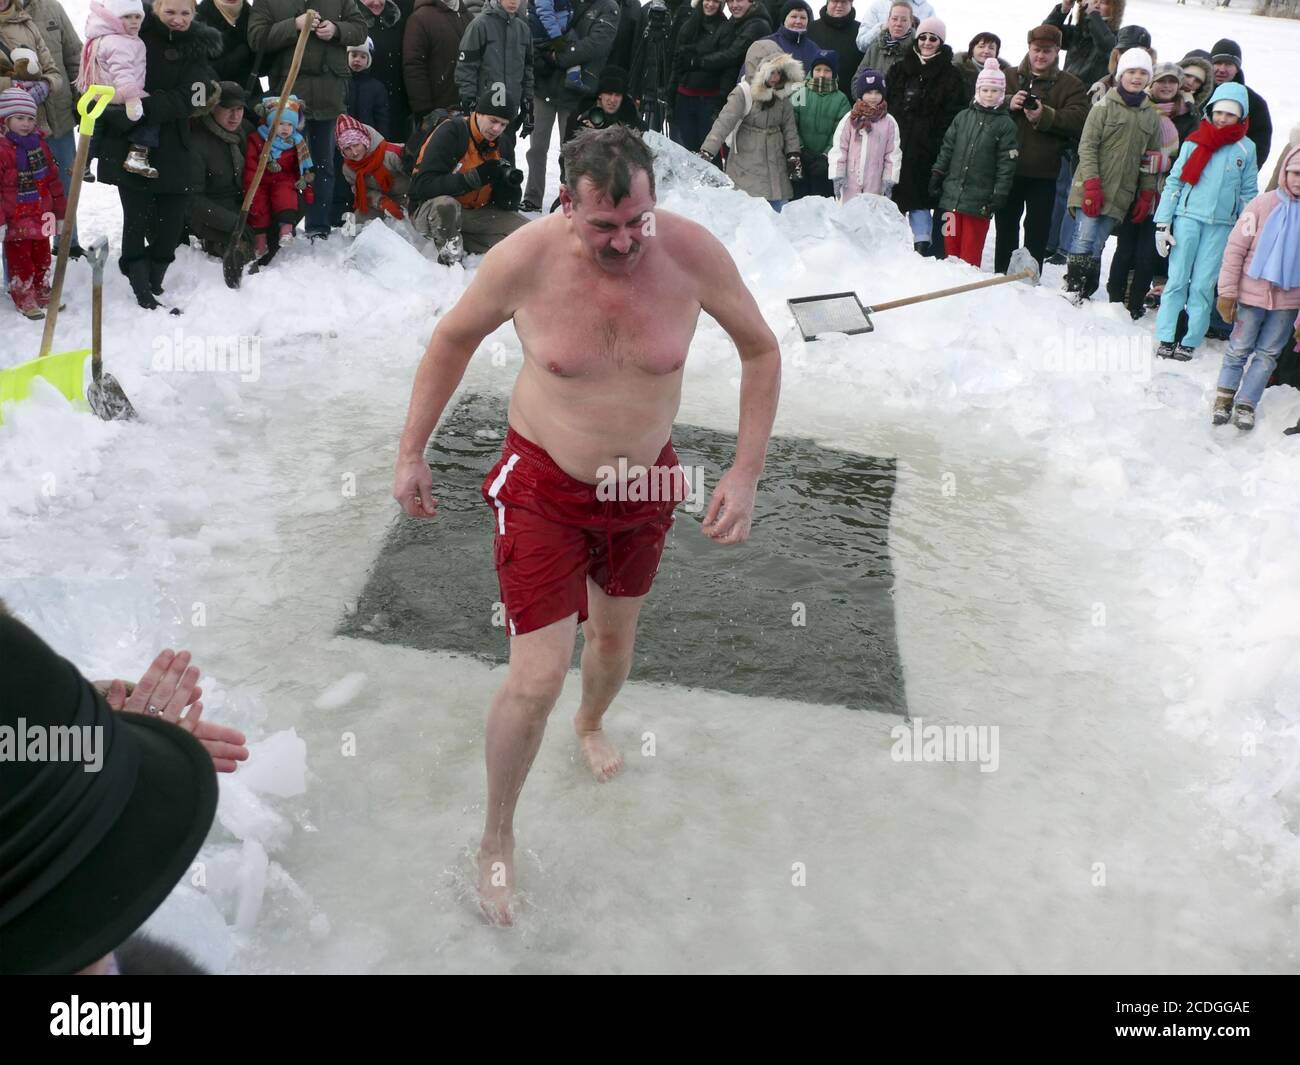 VILNIUS, LITHUANIA – FEBRUARY 5: Fans of winter swimming take a bath in some ice water on February 5, 2011 in Vilnius, Lithuan Stock Photo